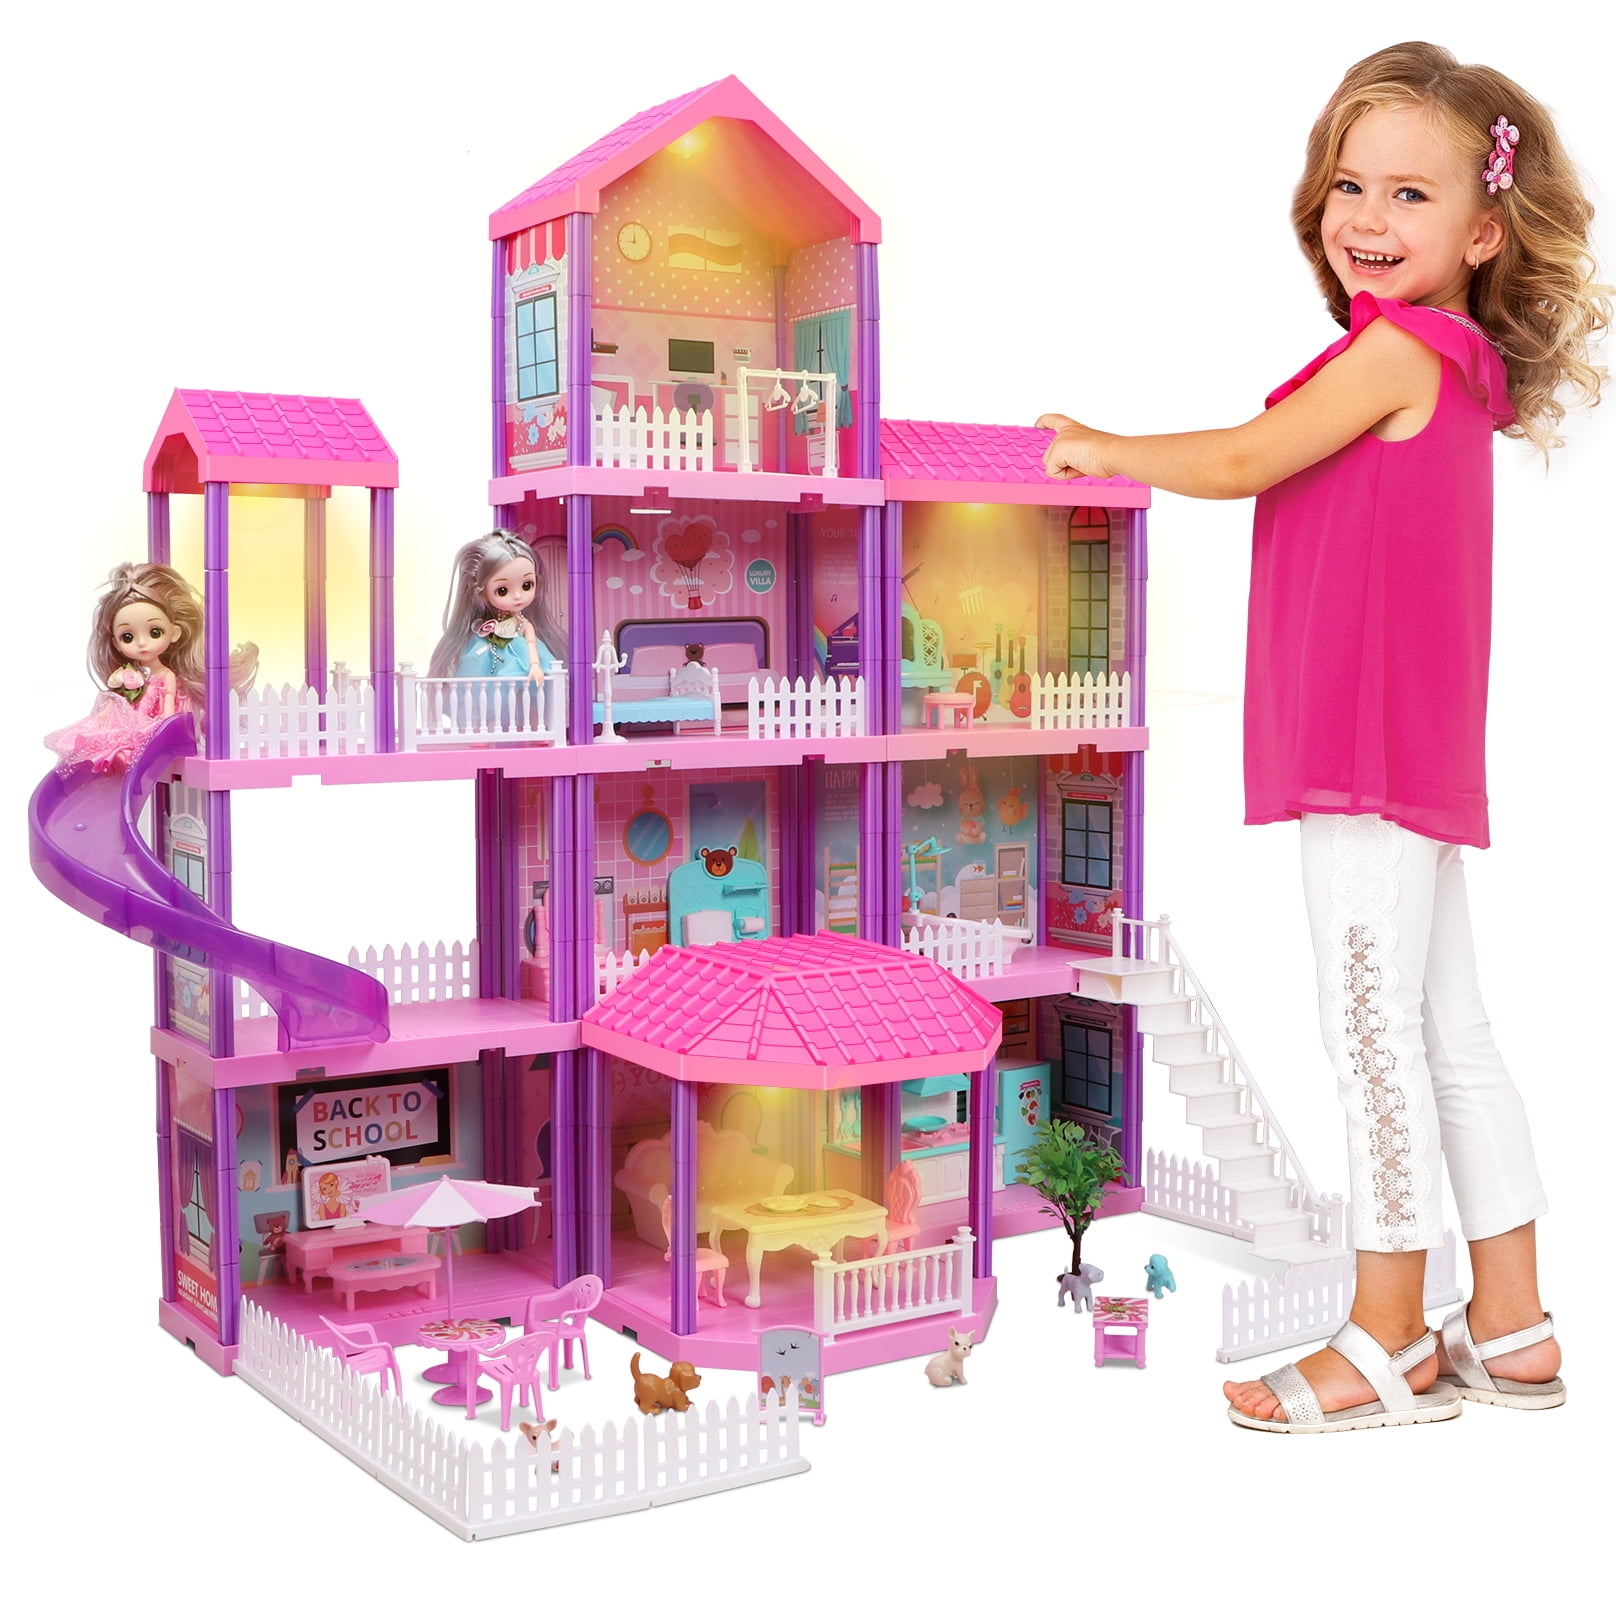 2-Story Barbie House Playset Furniture and amp; Accessories Fold Girls Toys 